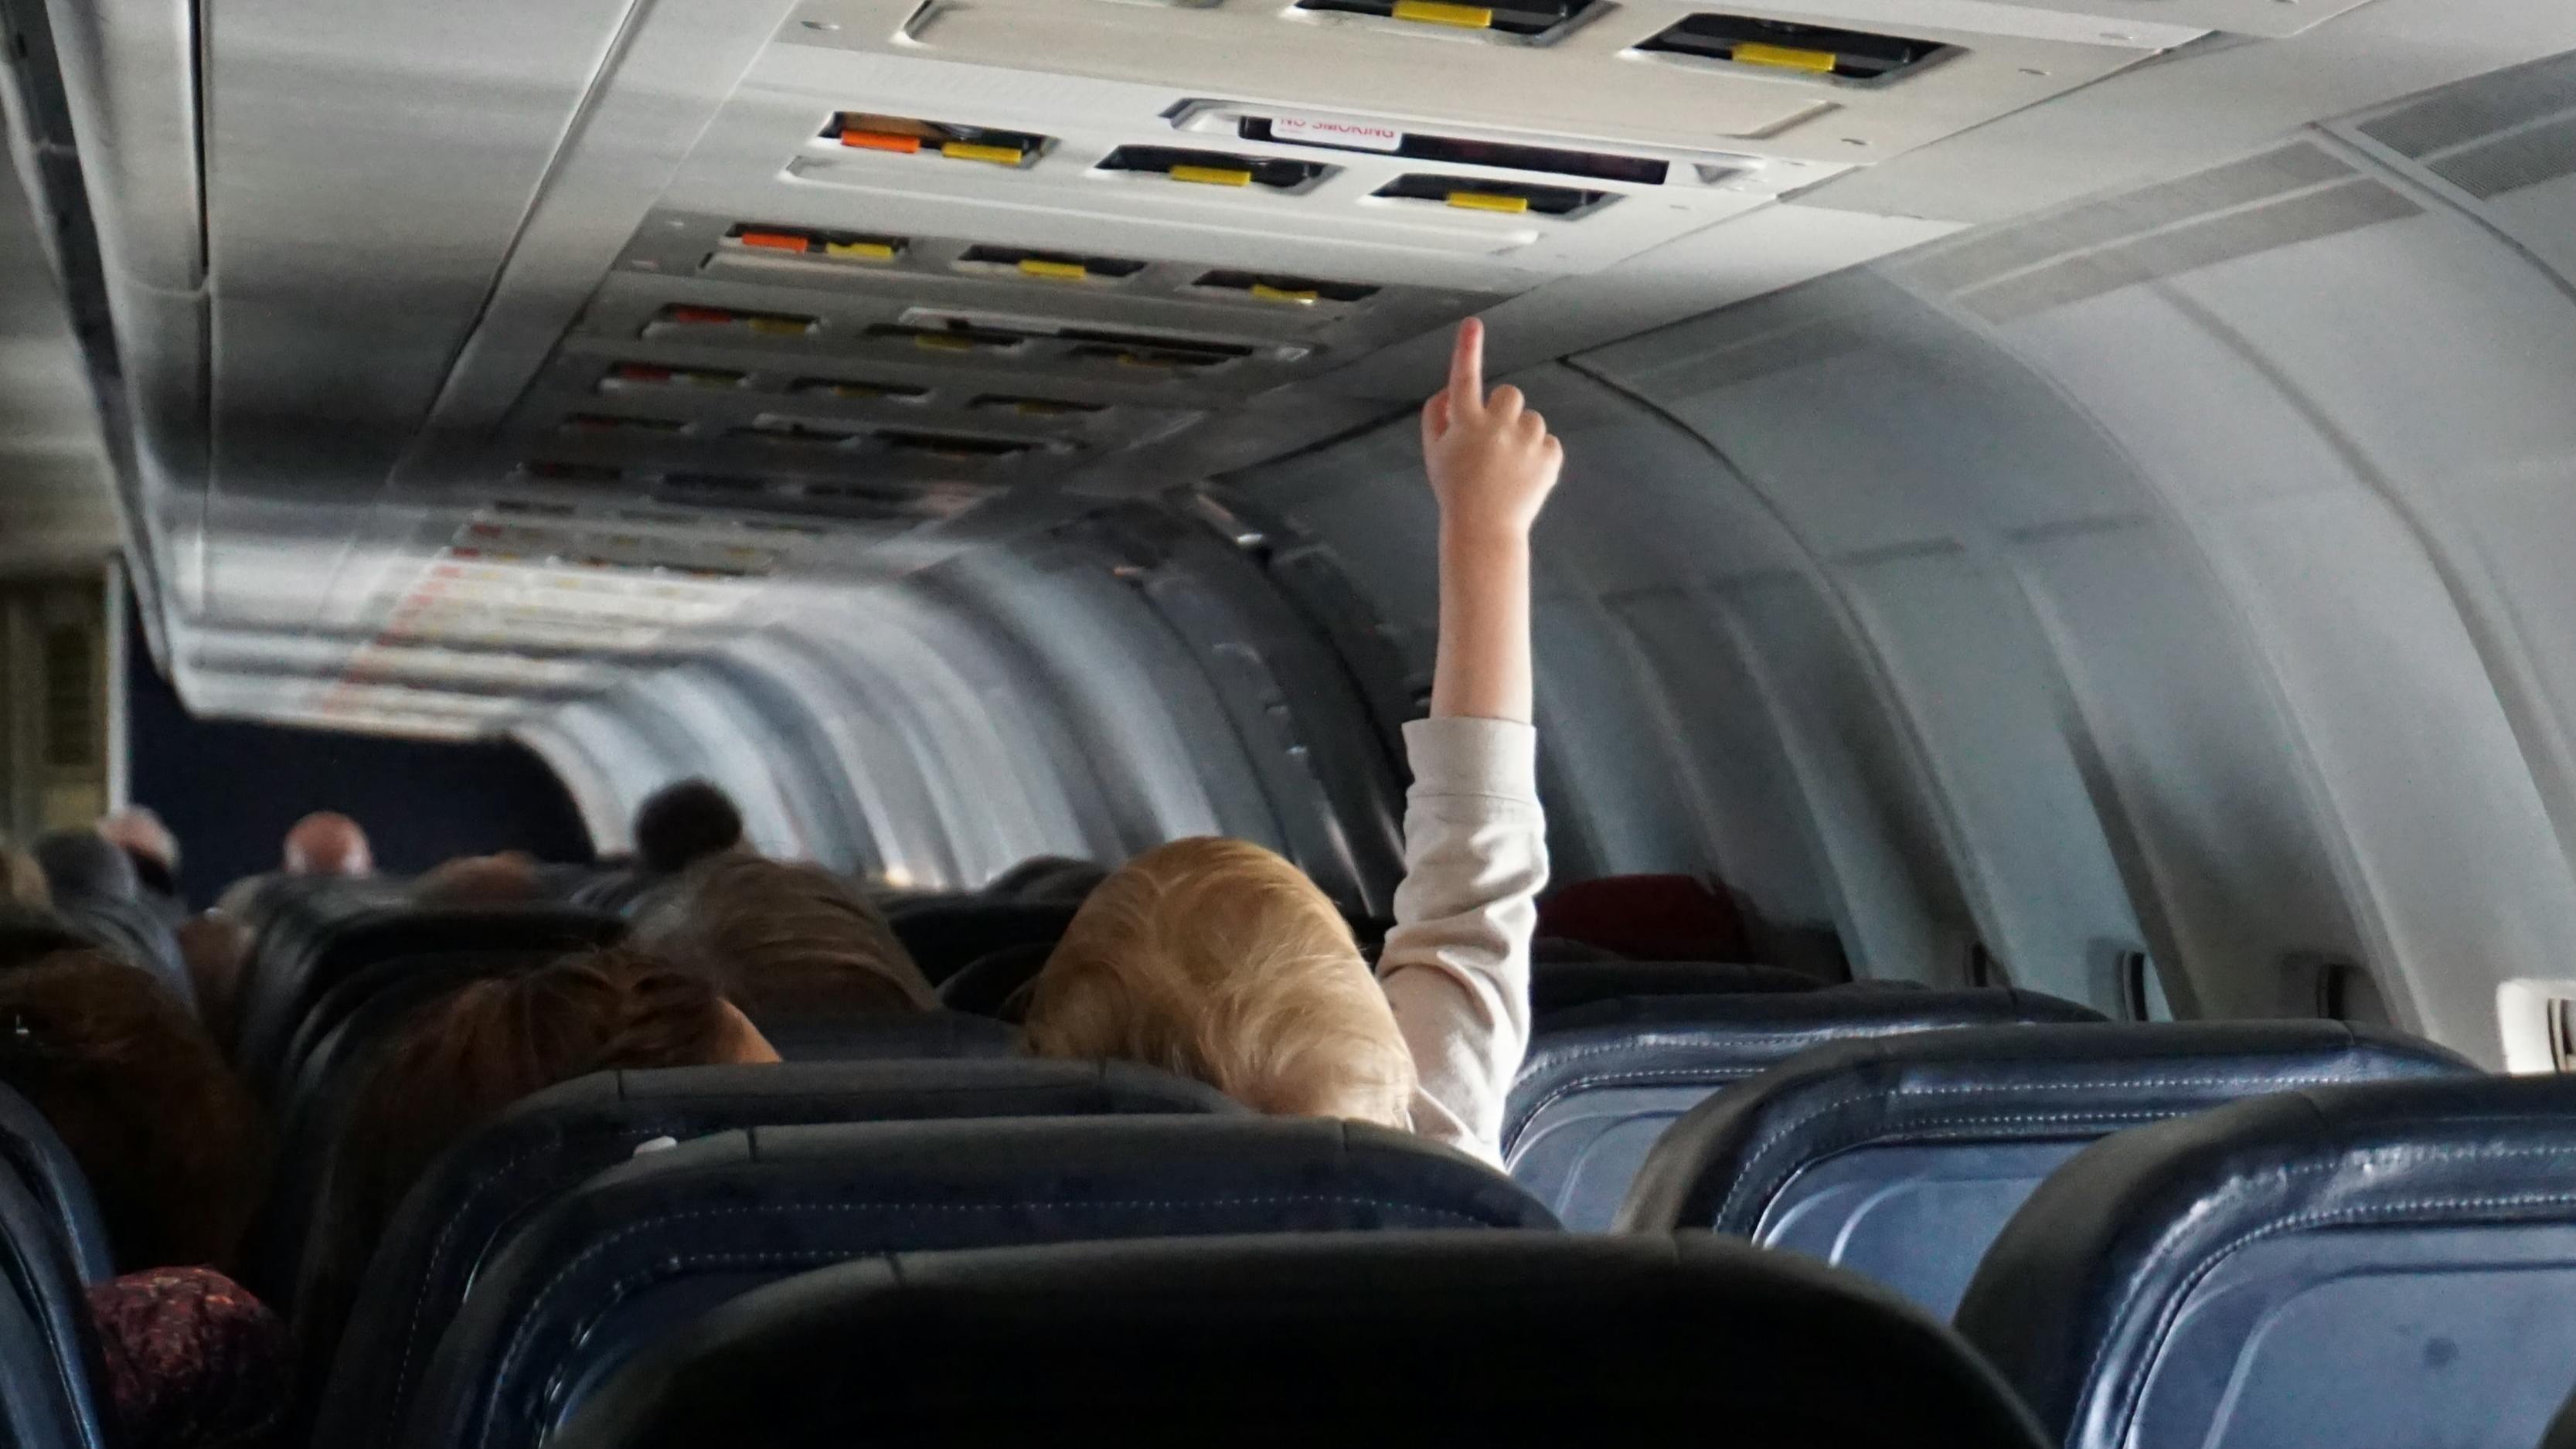 A baby reaches up from an airplane seat to touch a button on the ceiling. 